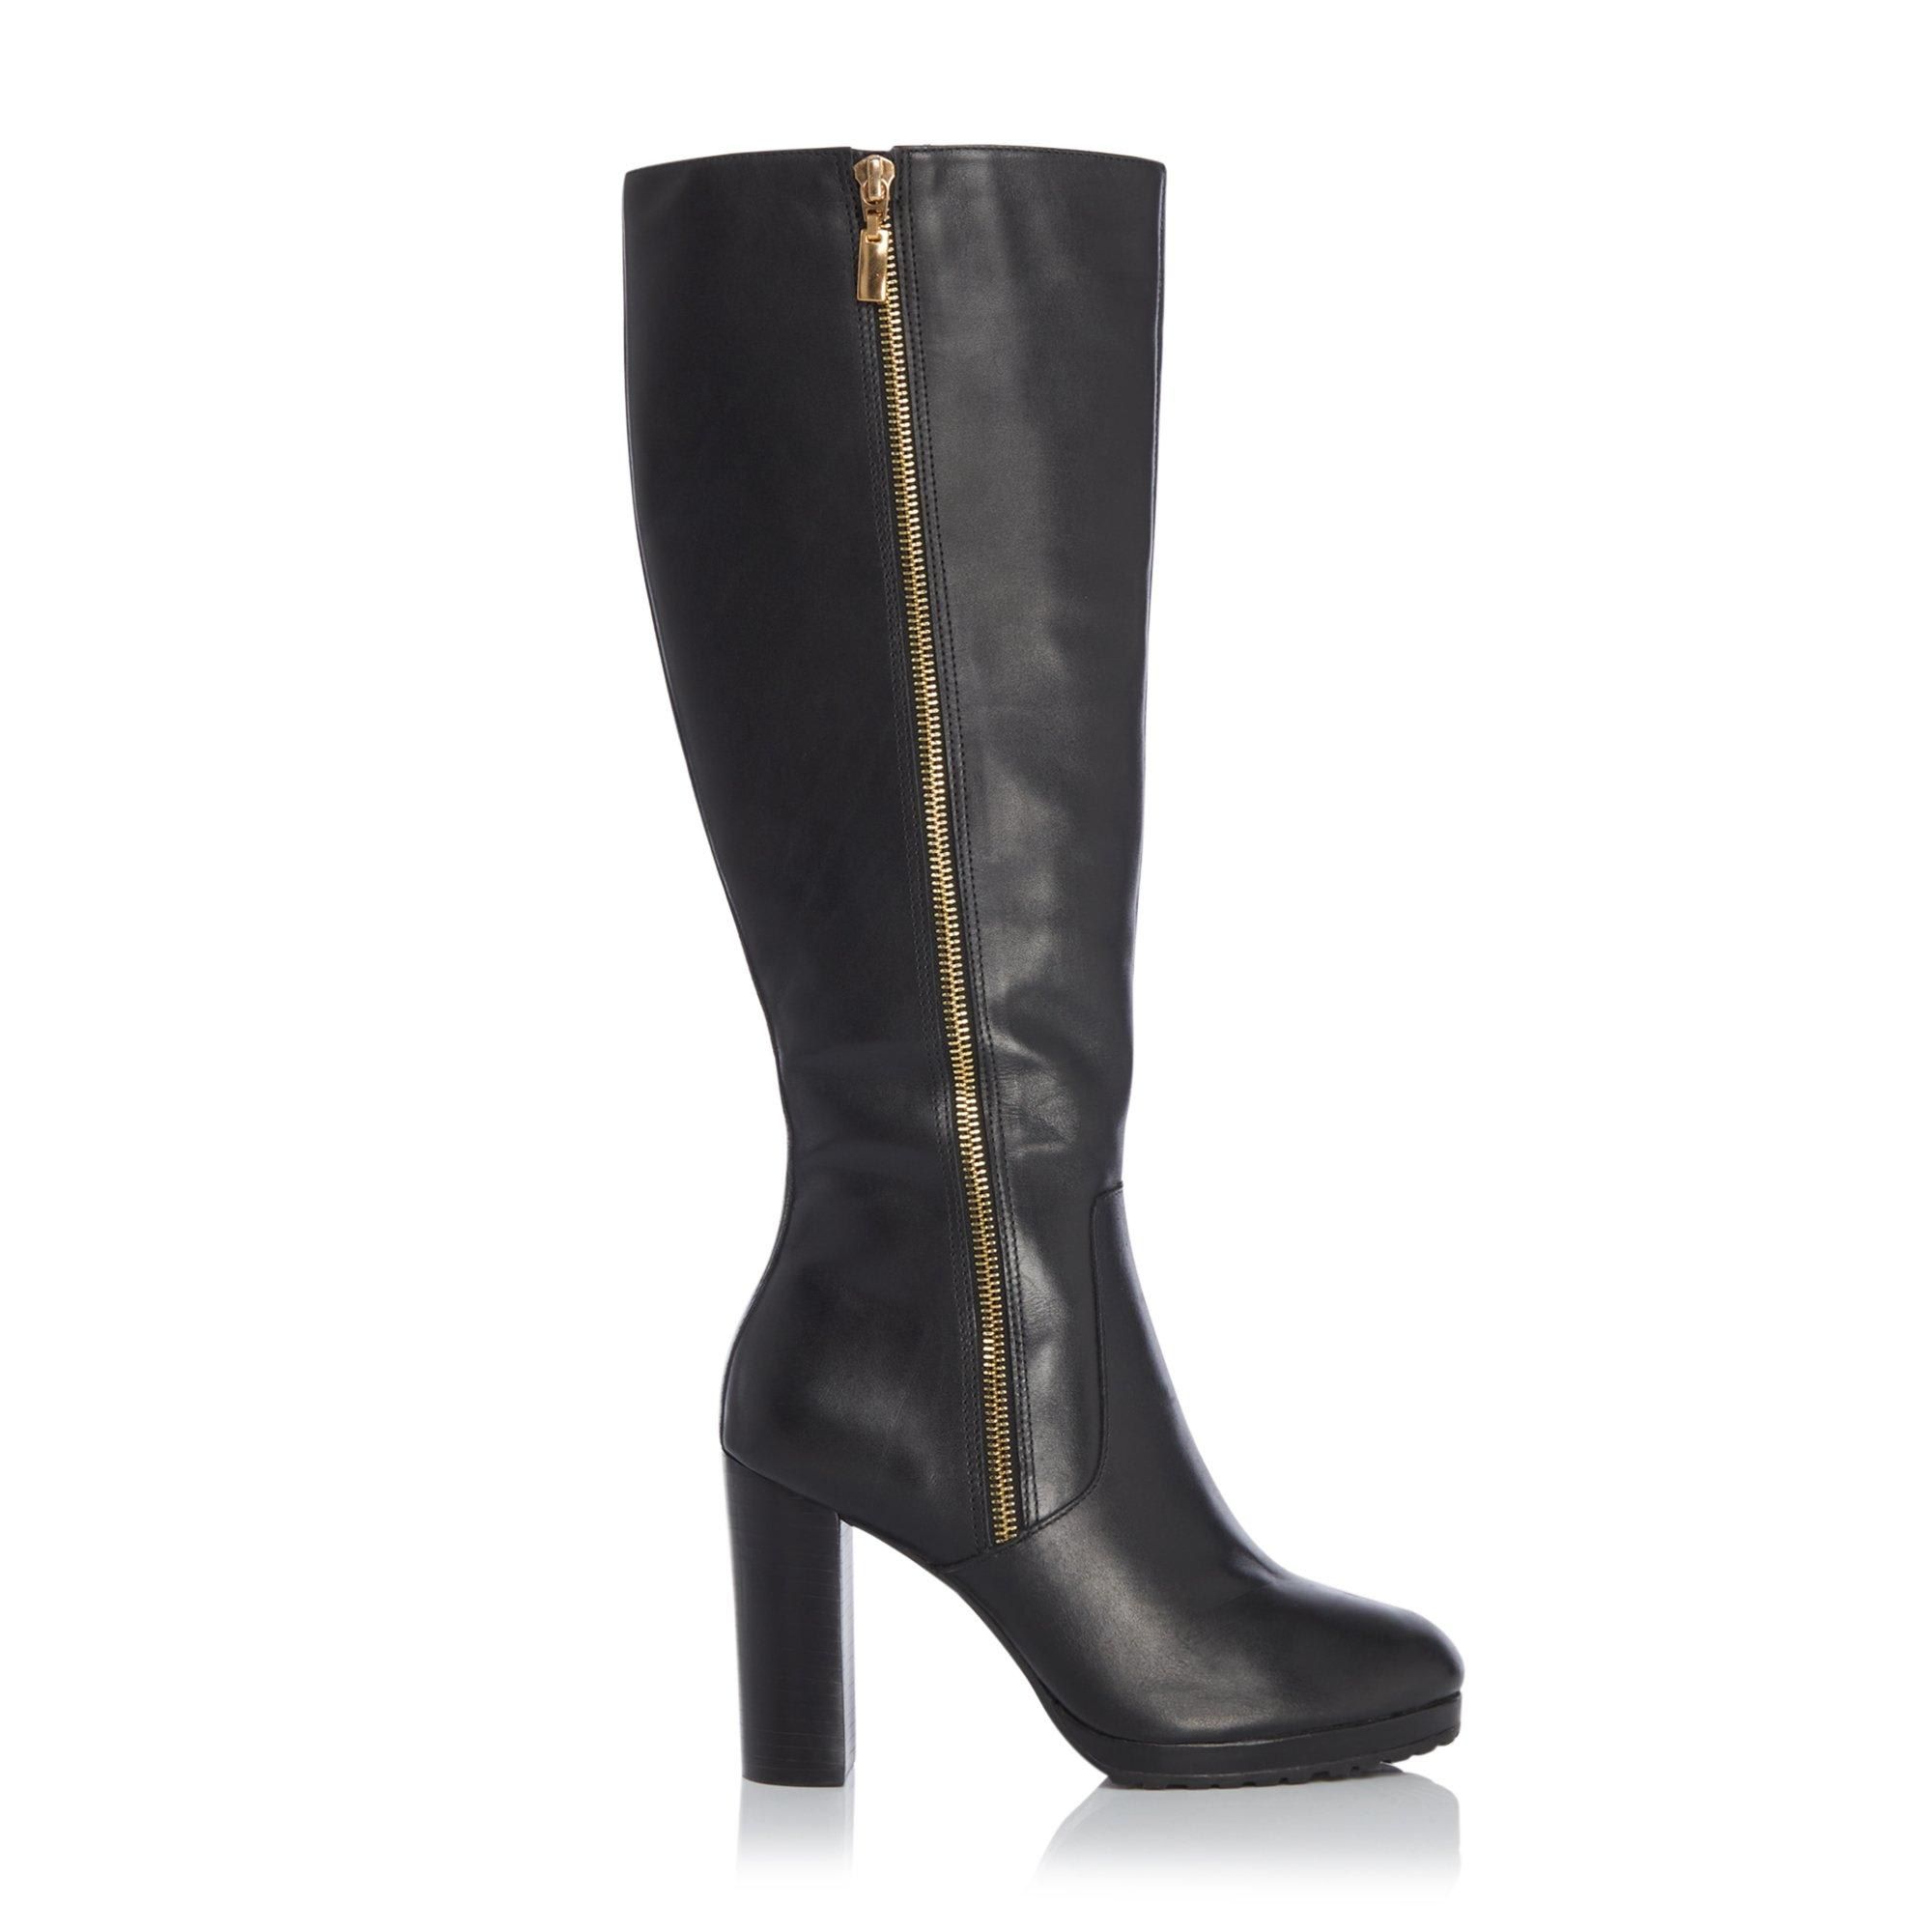 Reach new heights with these classy high-heeled boots. In knee high length with a cleated front sole and block heel. Complete with a gold zip detail and full length zip fastening.